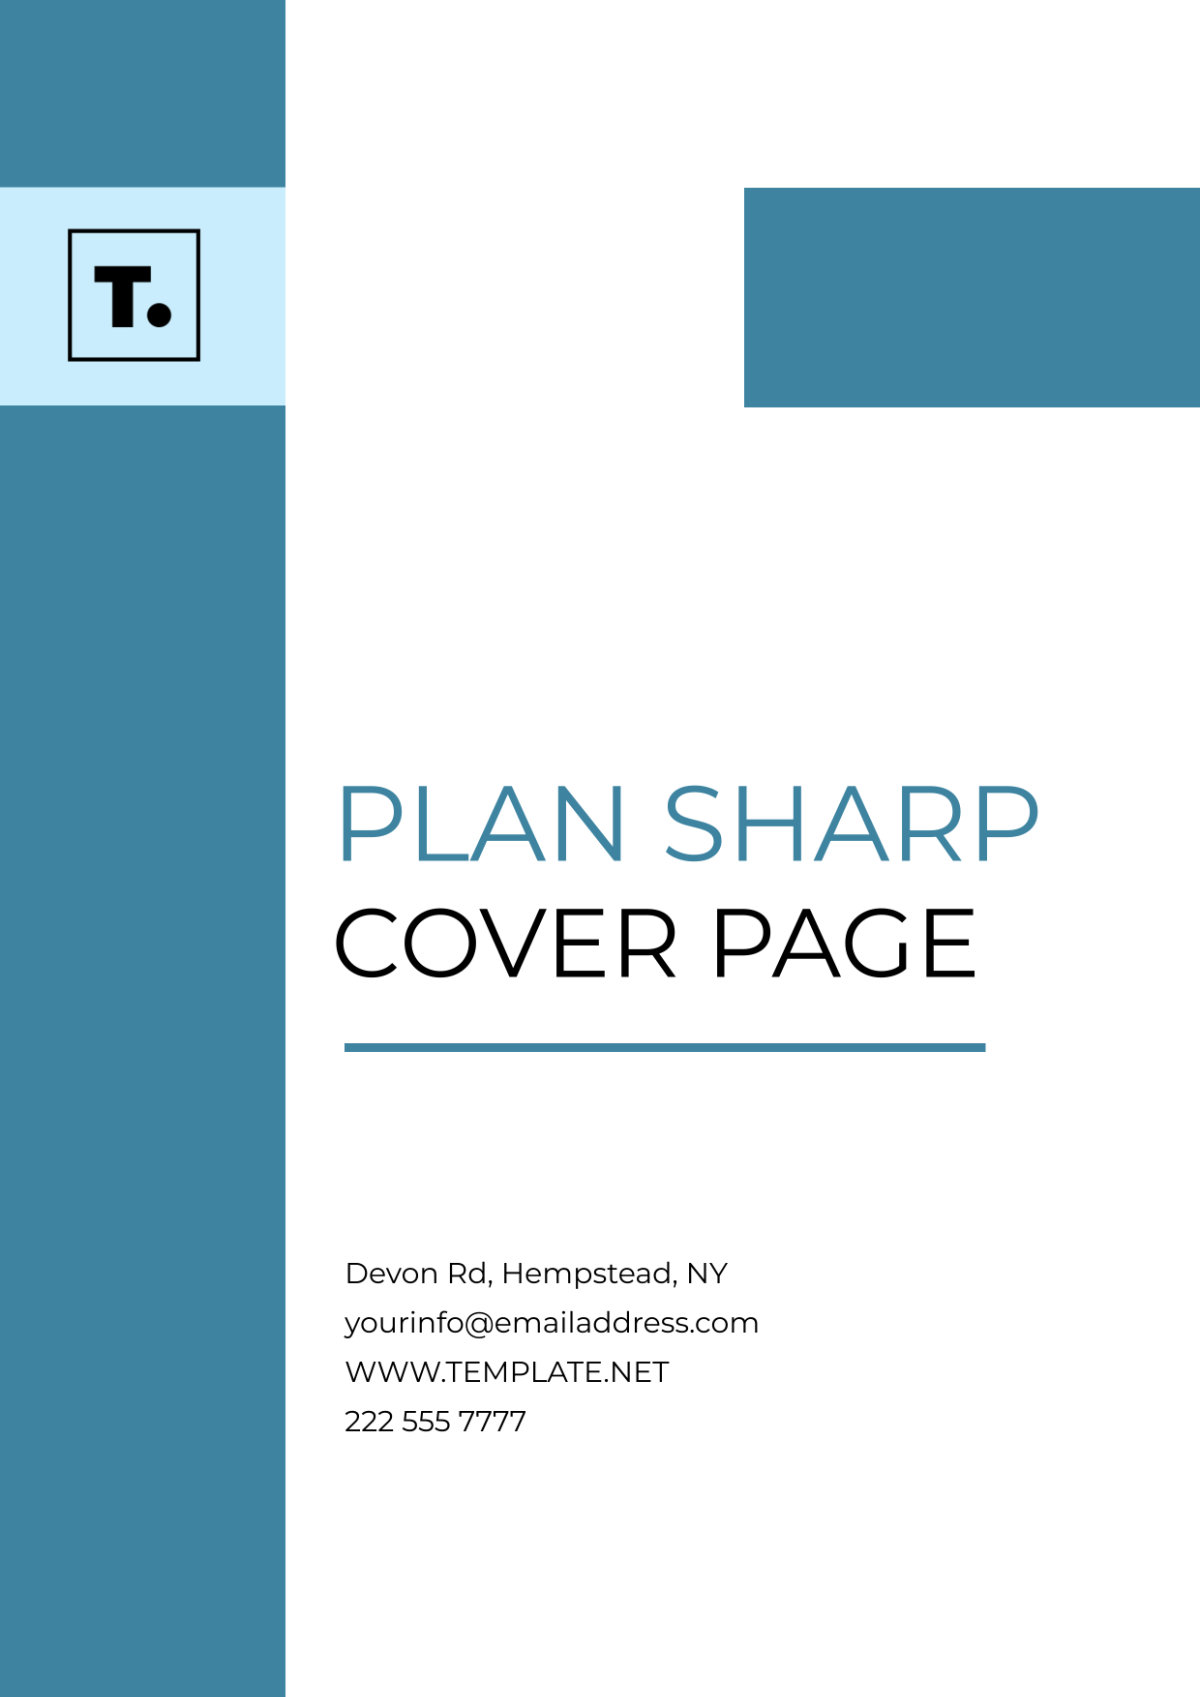 Plan Sharp Cover Page